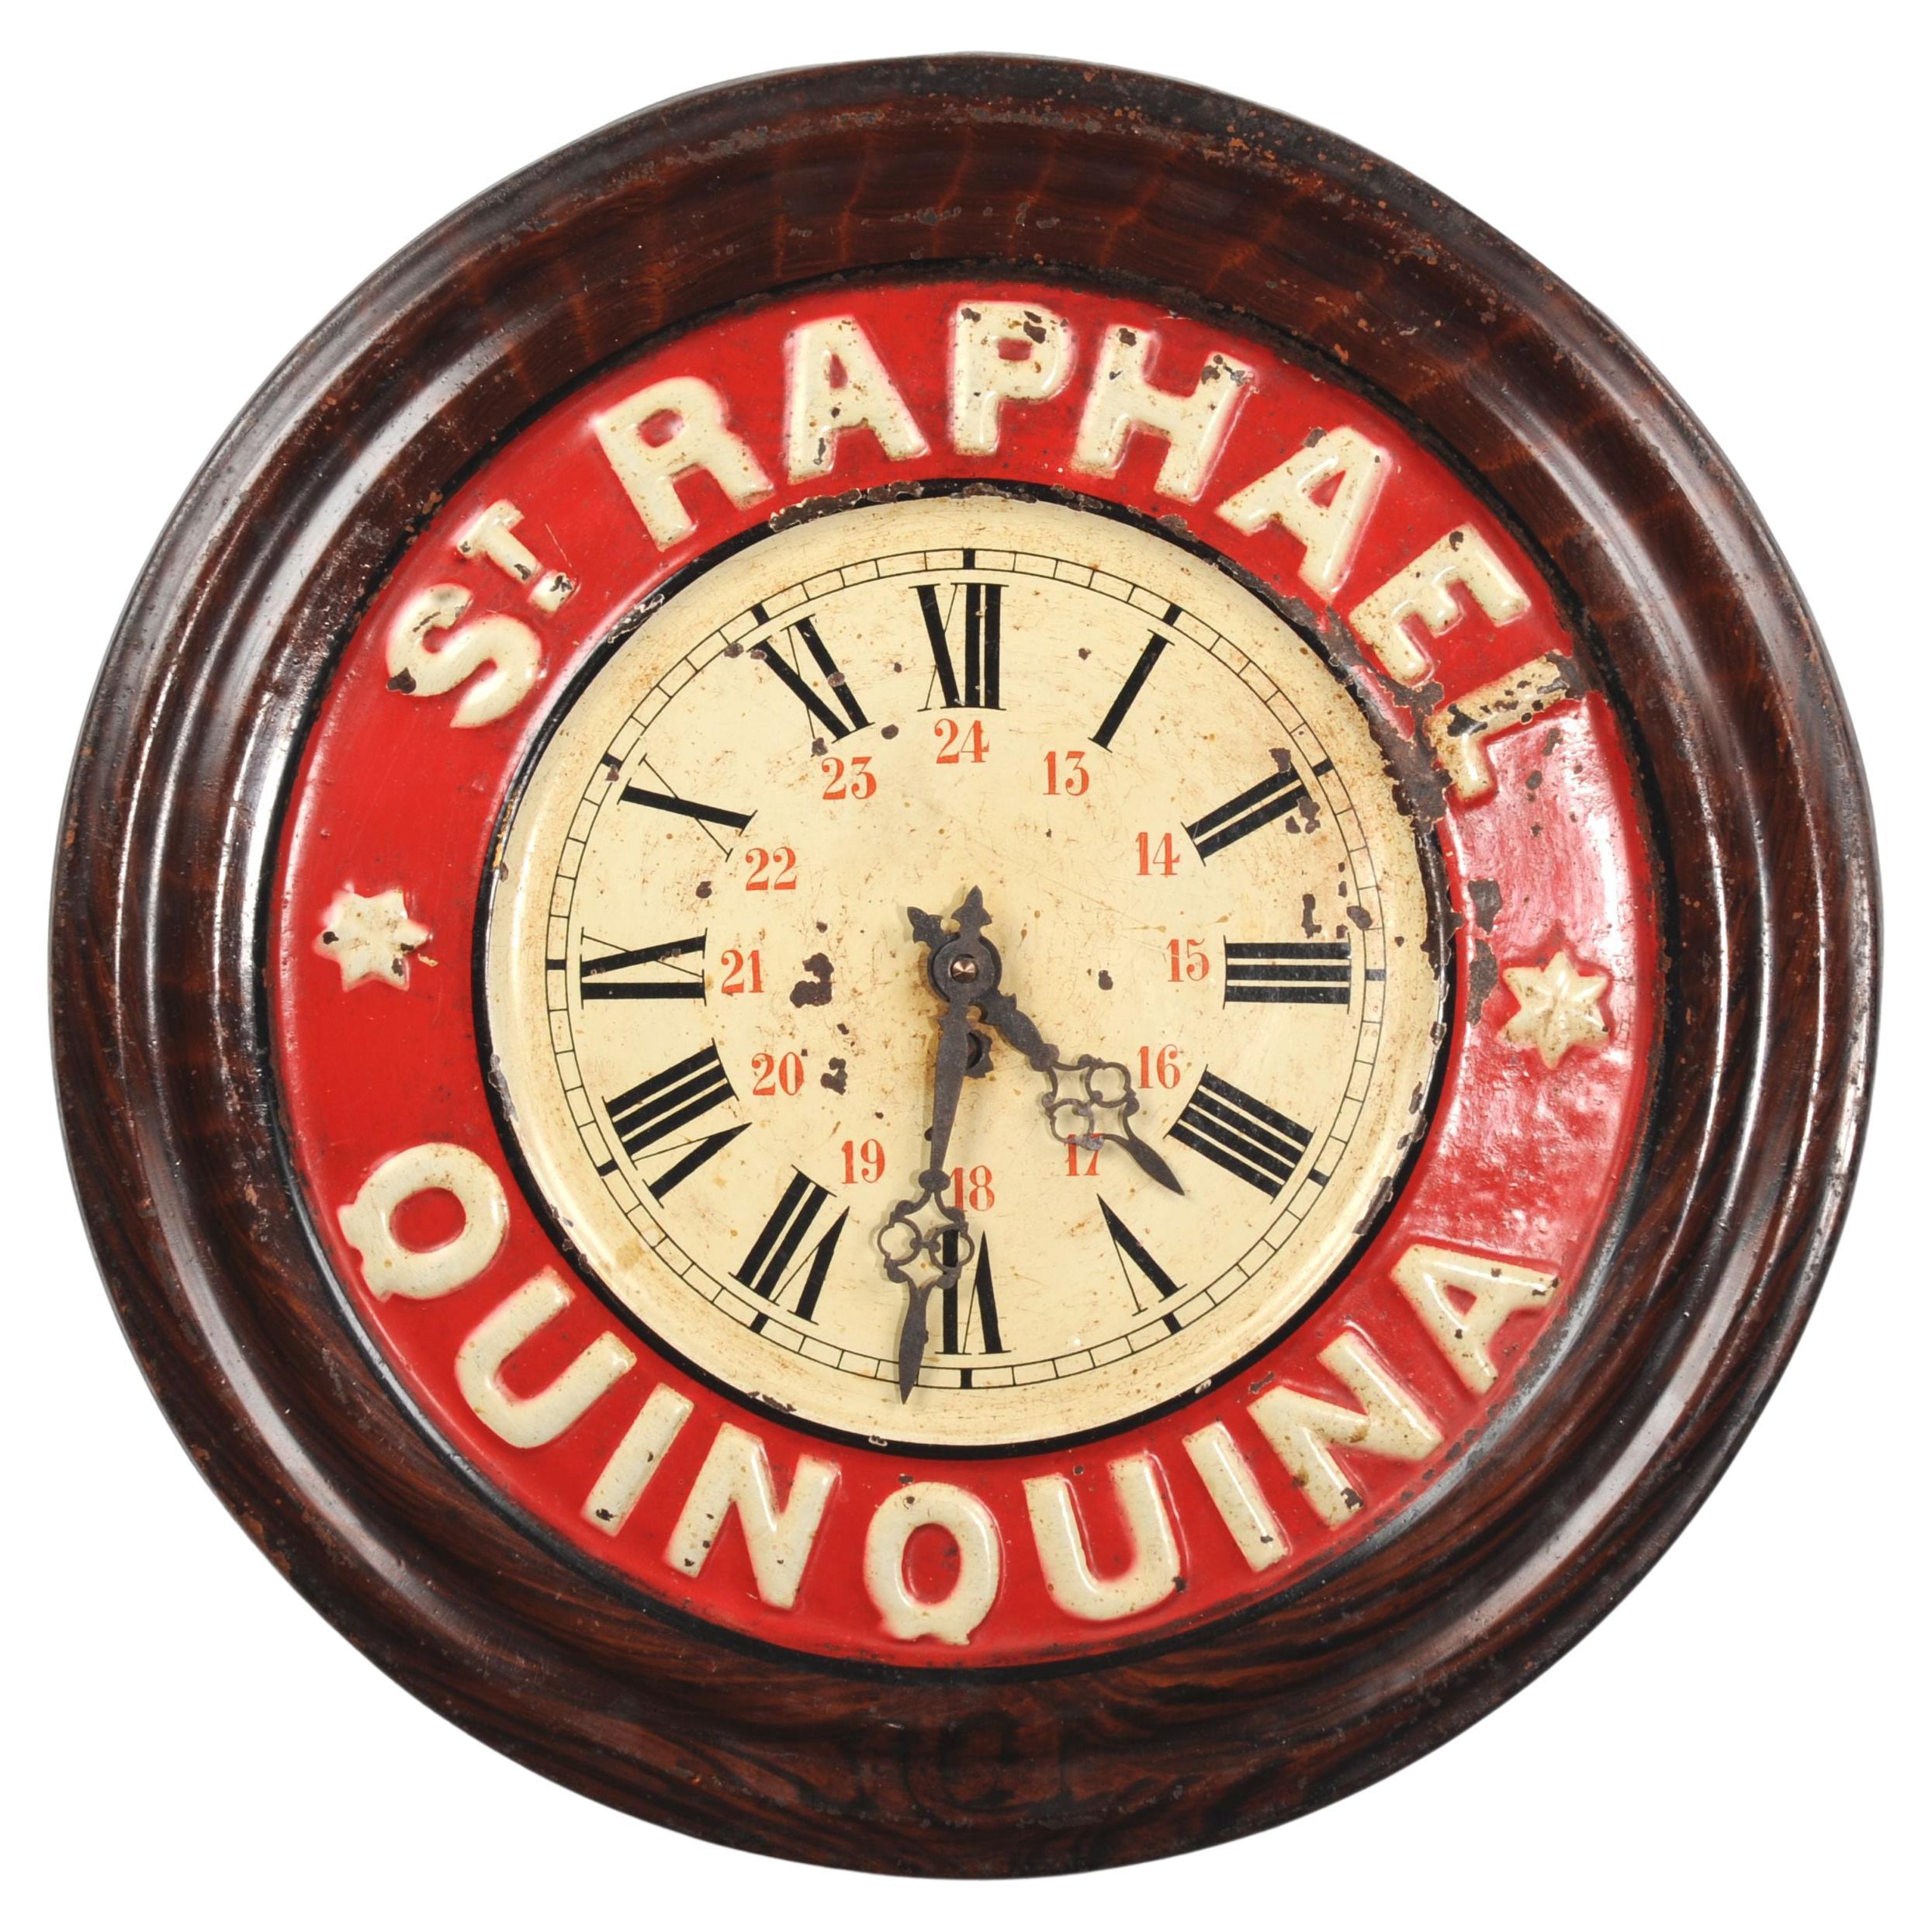 Original French St Raphael Quinquina Advertising Wall Clock, Fully Working